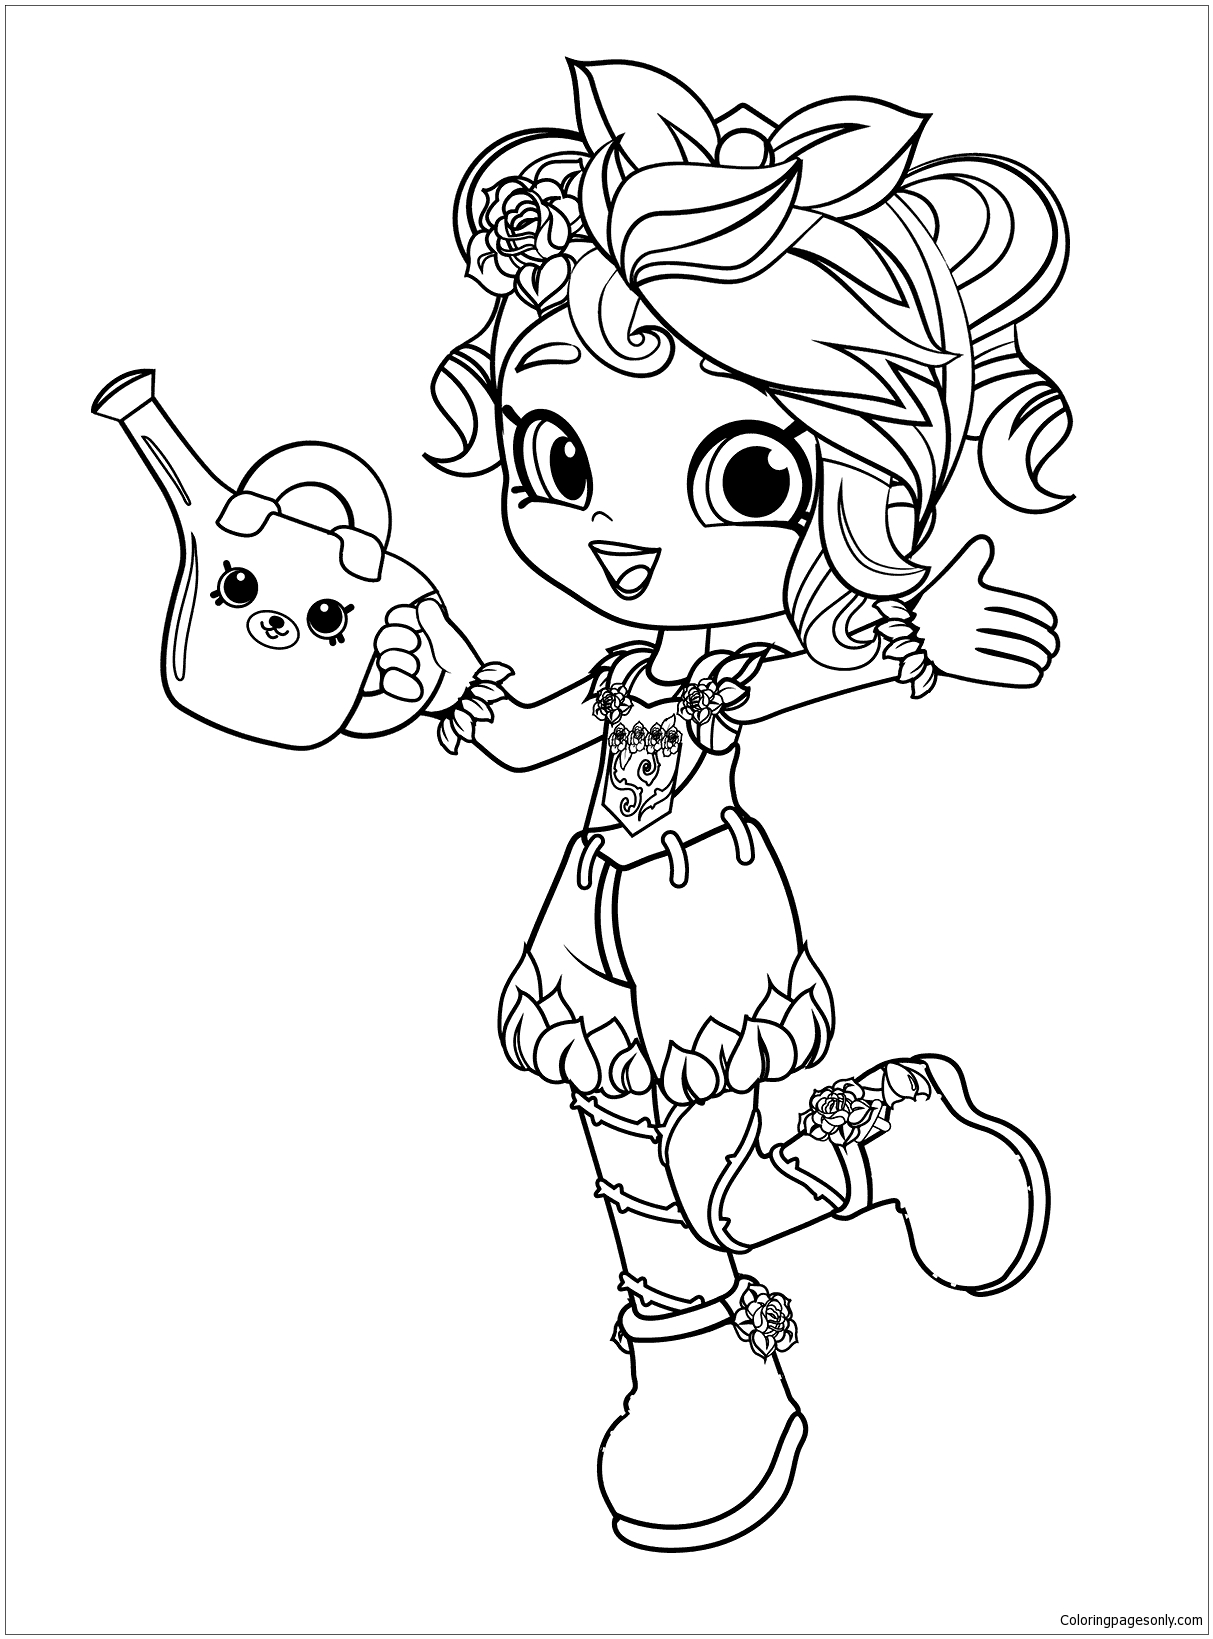 Shopkins Shoppies Ballet Coloring Page - Free Coloring Pages Online